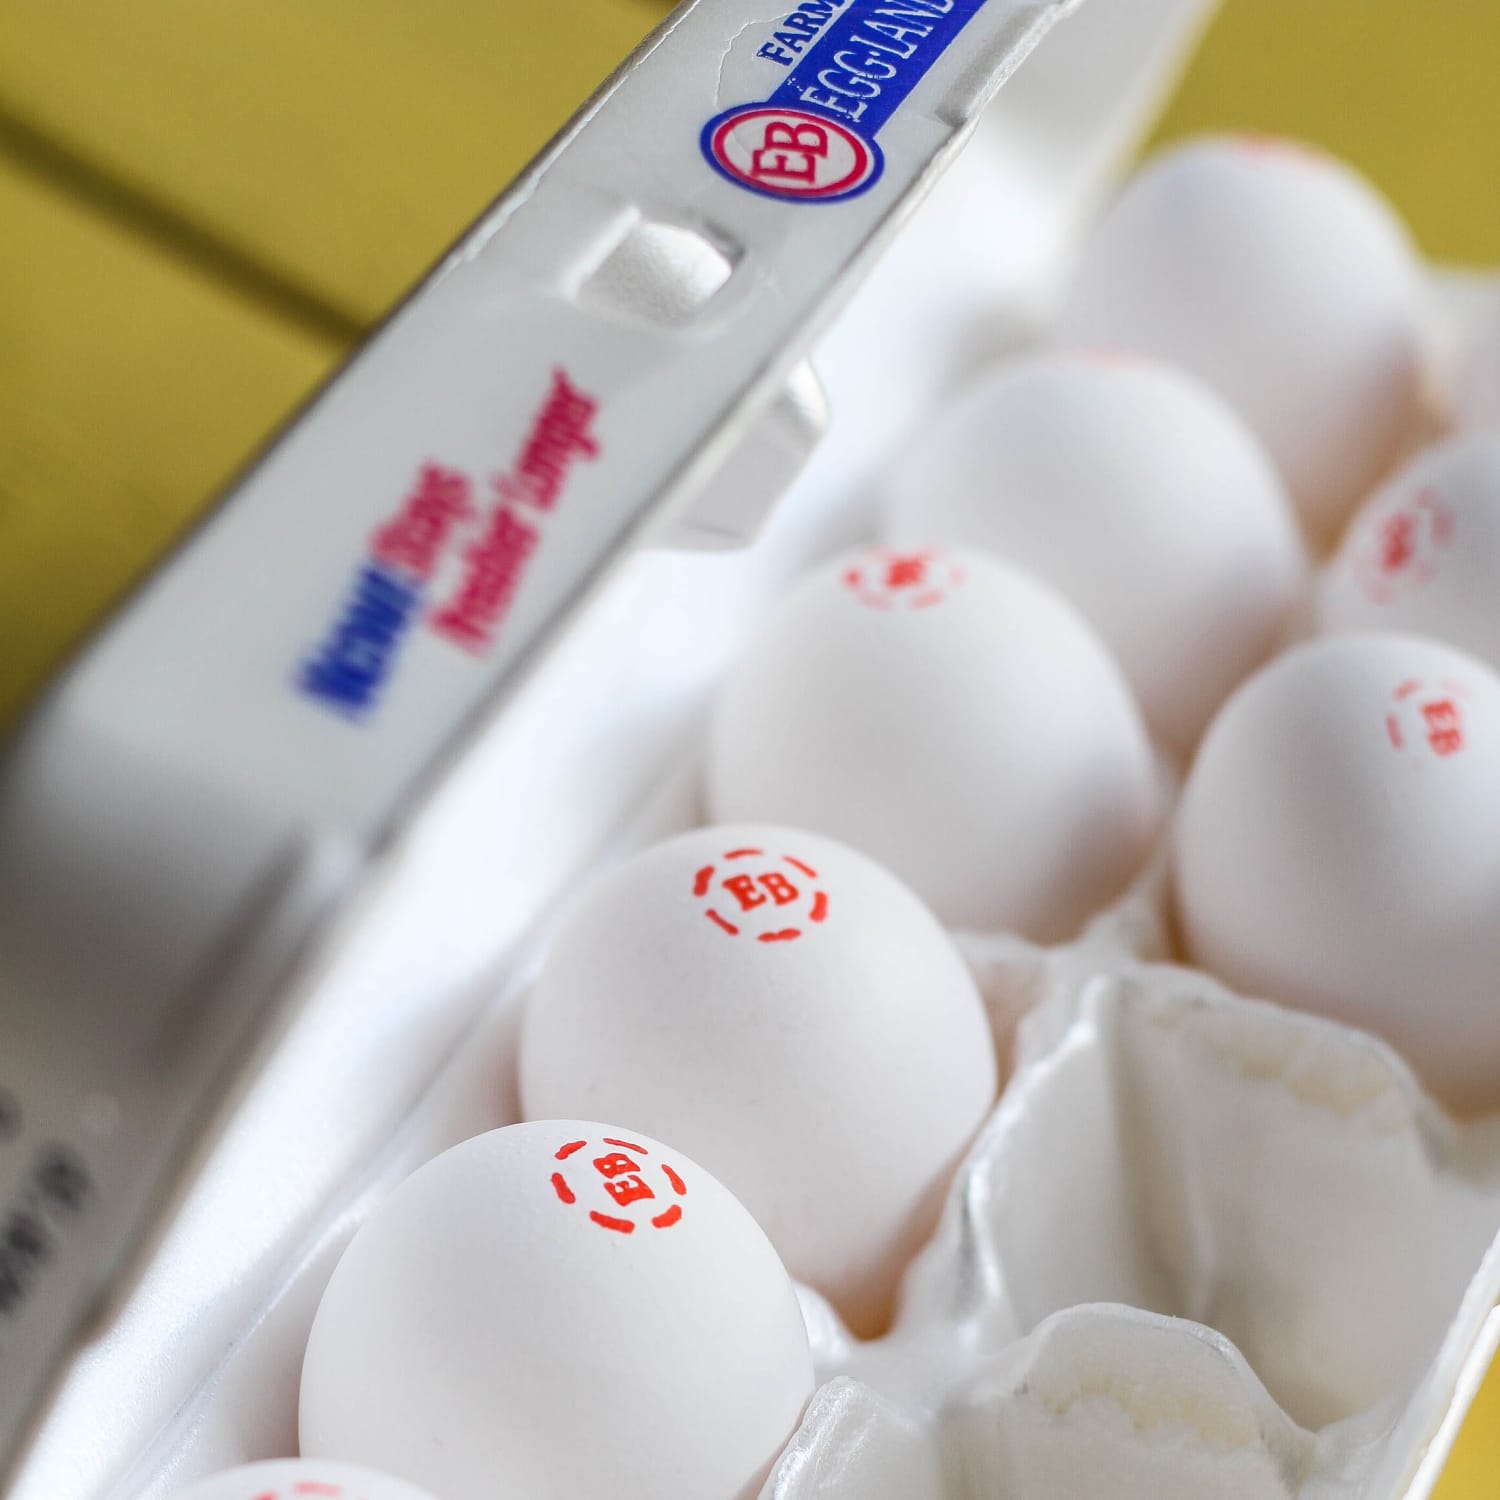 Here's What the Red Stamp on Eggland's Best Eggs Means